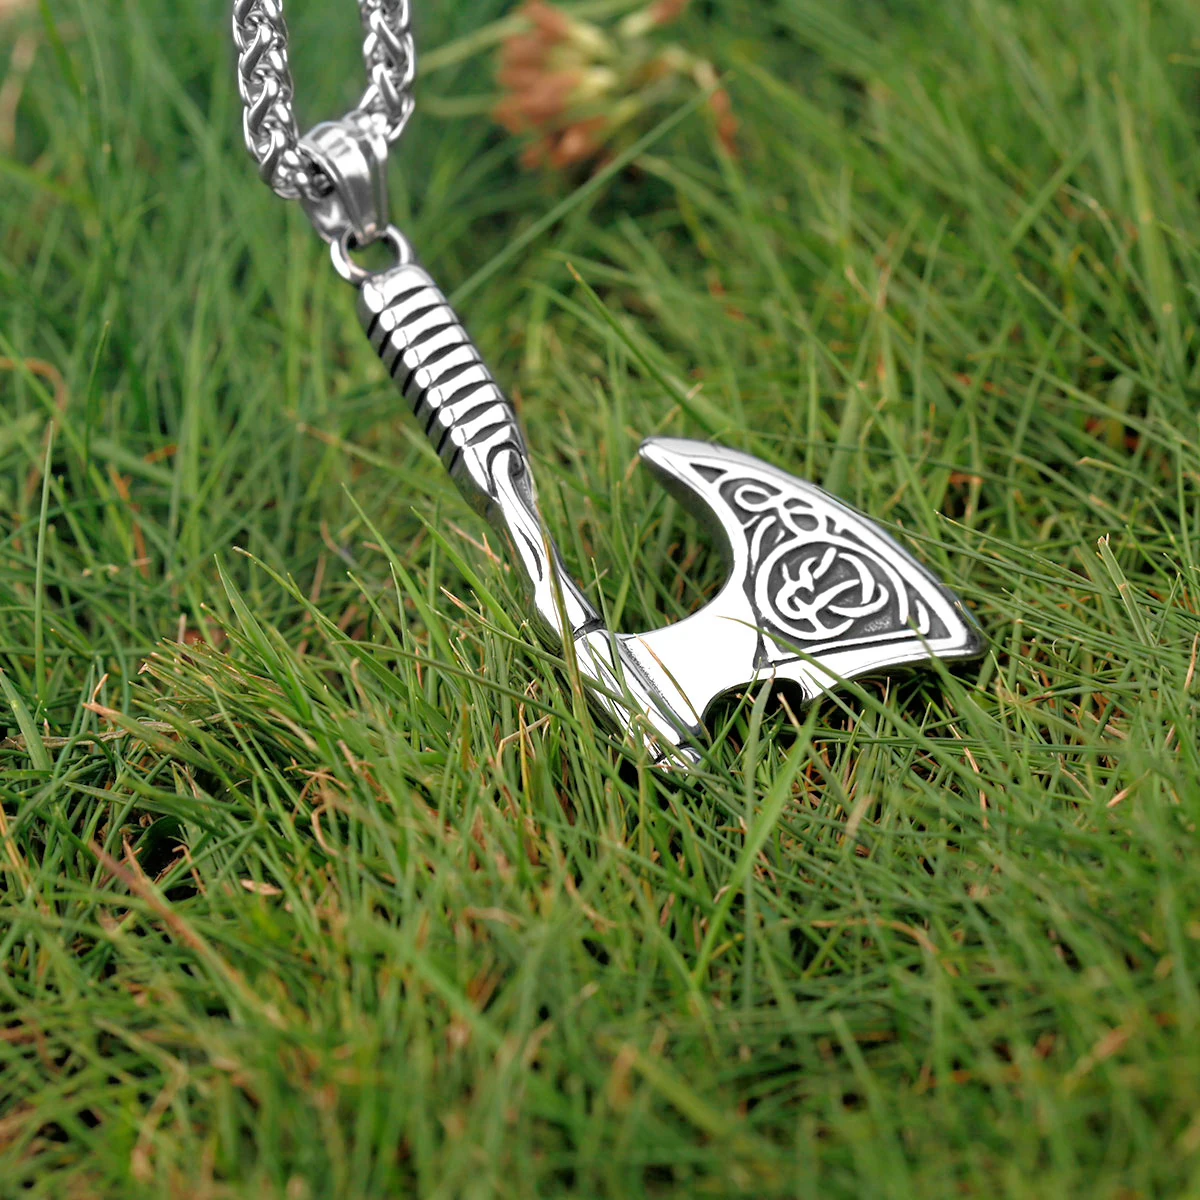 

Nordic Viking Warrior Axe Necklace Men's Stainless Steel Celtic Knot Amulet Pendant Necklace Vintage Fashion Male Jewelry Gift